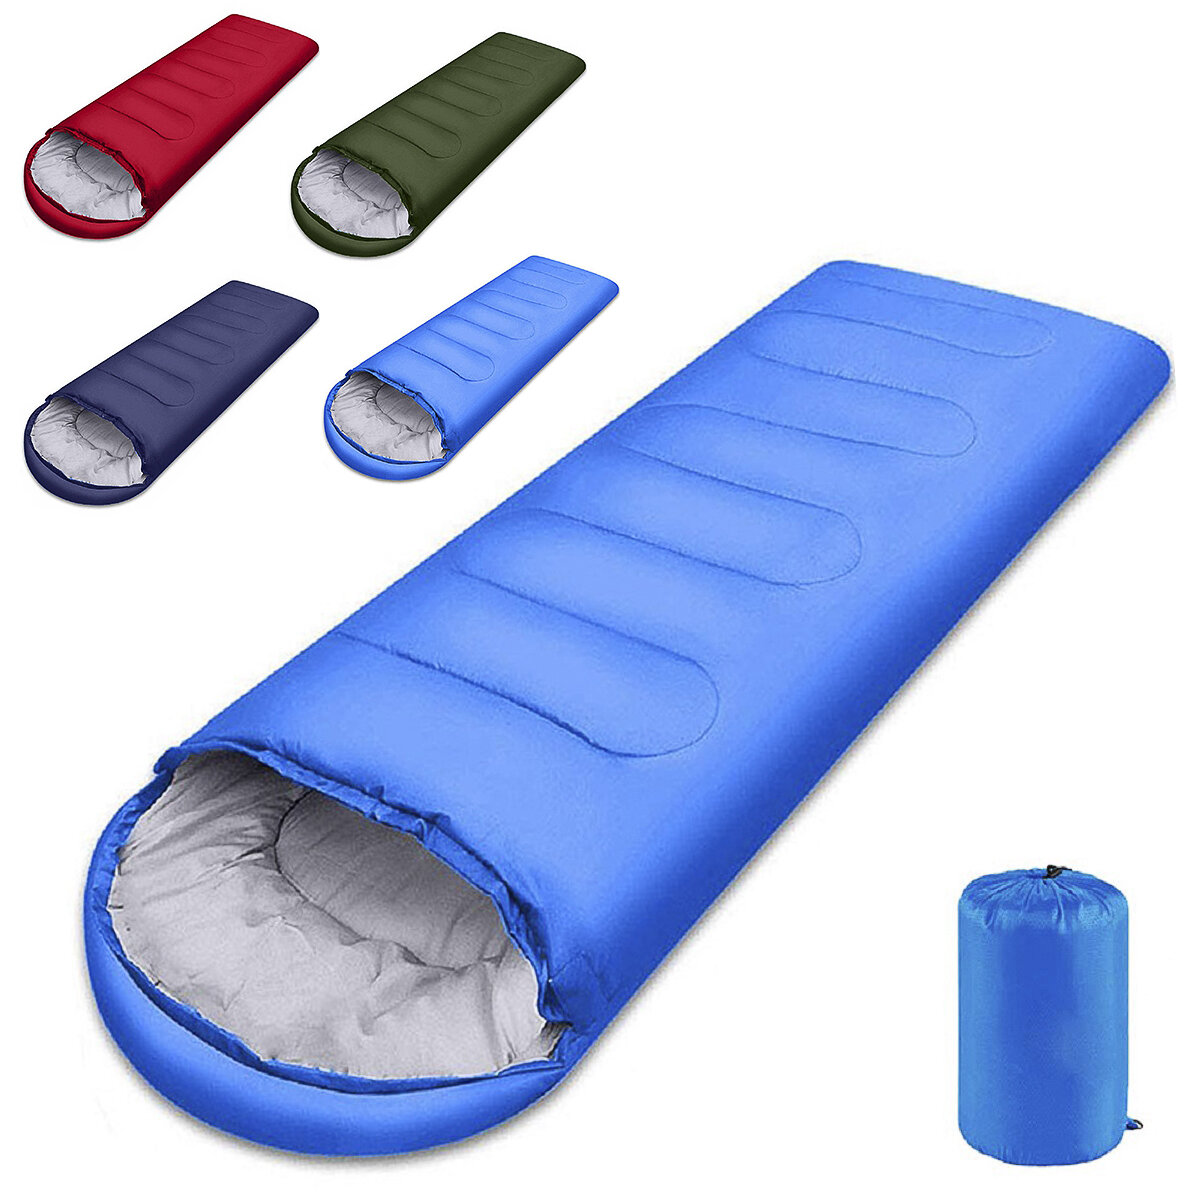 Outdoor Waterproof Compression Sleeping Bag Lightweight Sleep Bag With Storage Package For Camping Travel Drift Hiking